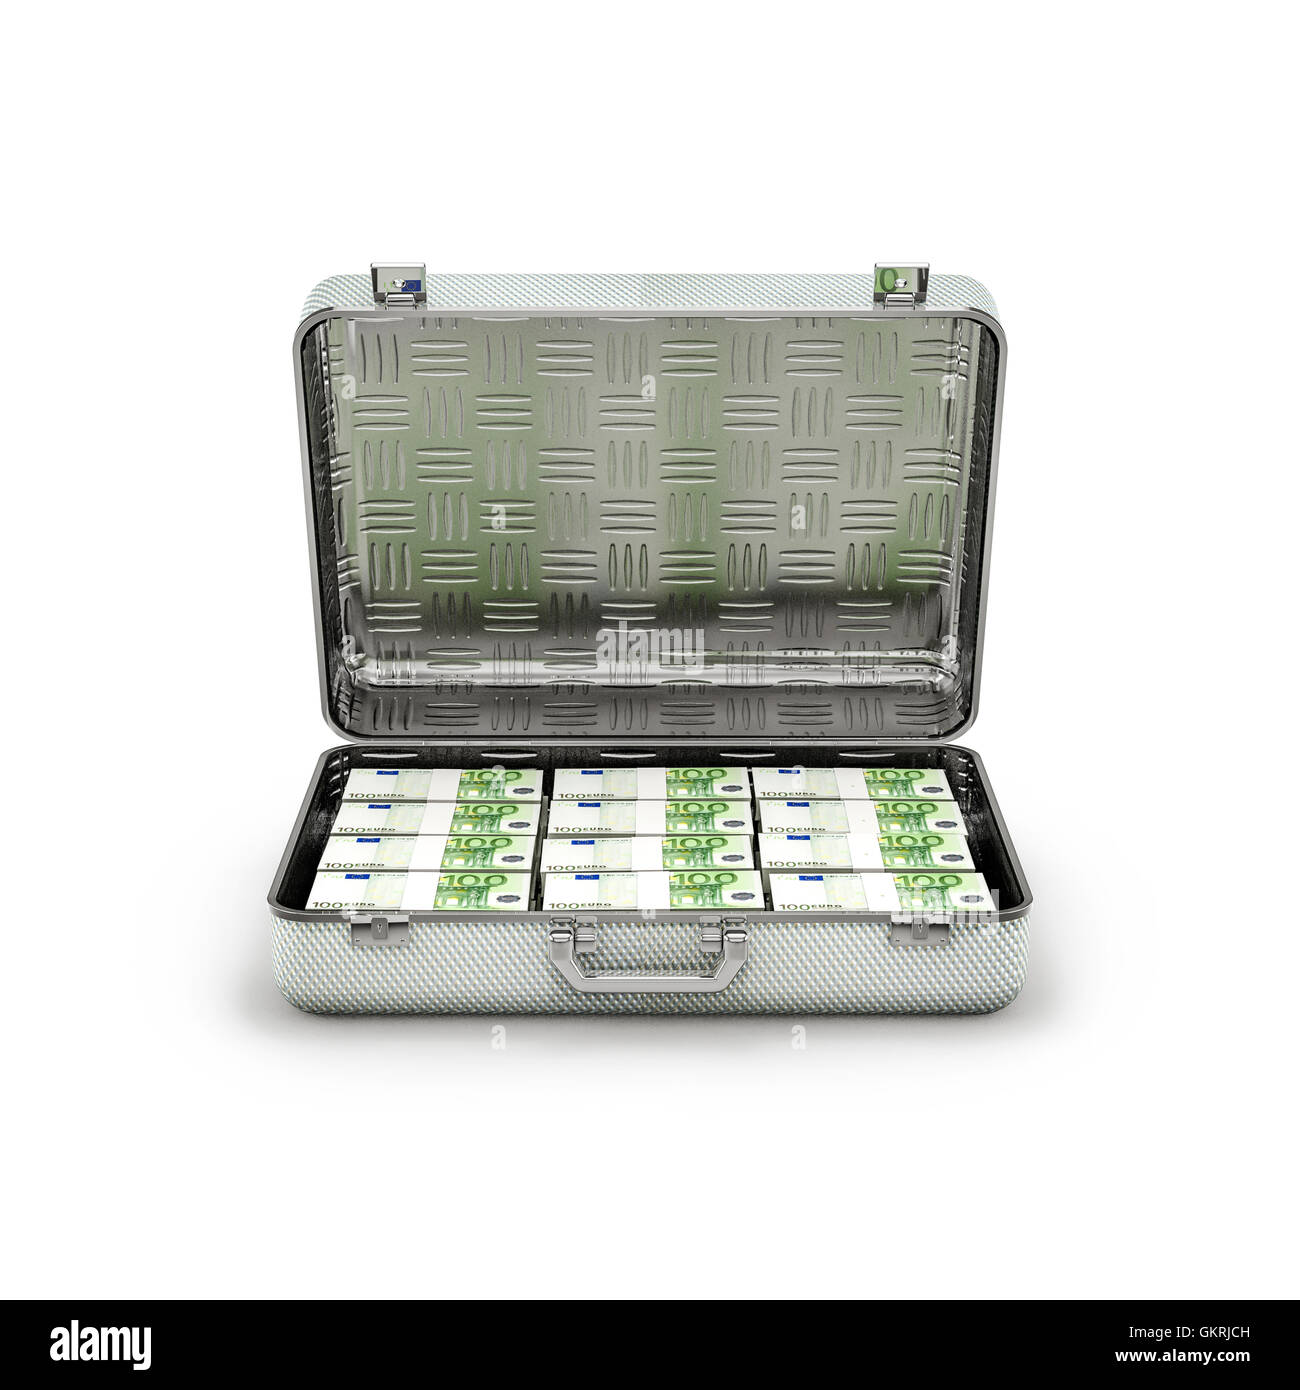 Briefcase ransom euros / 3D illustration of stacks of hundred euro notes inside metal briefcase Stock Photo